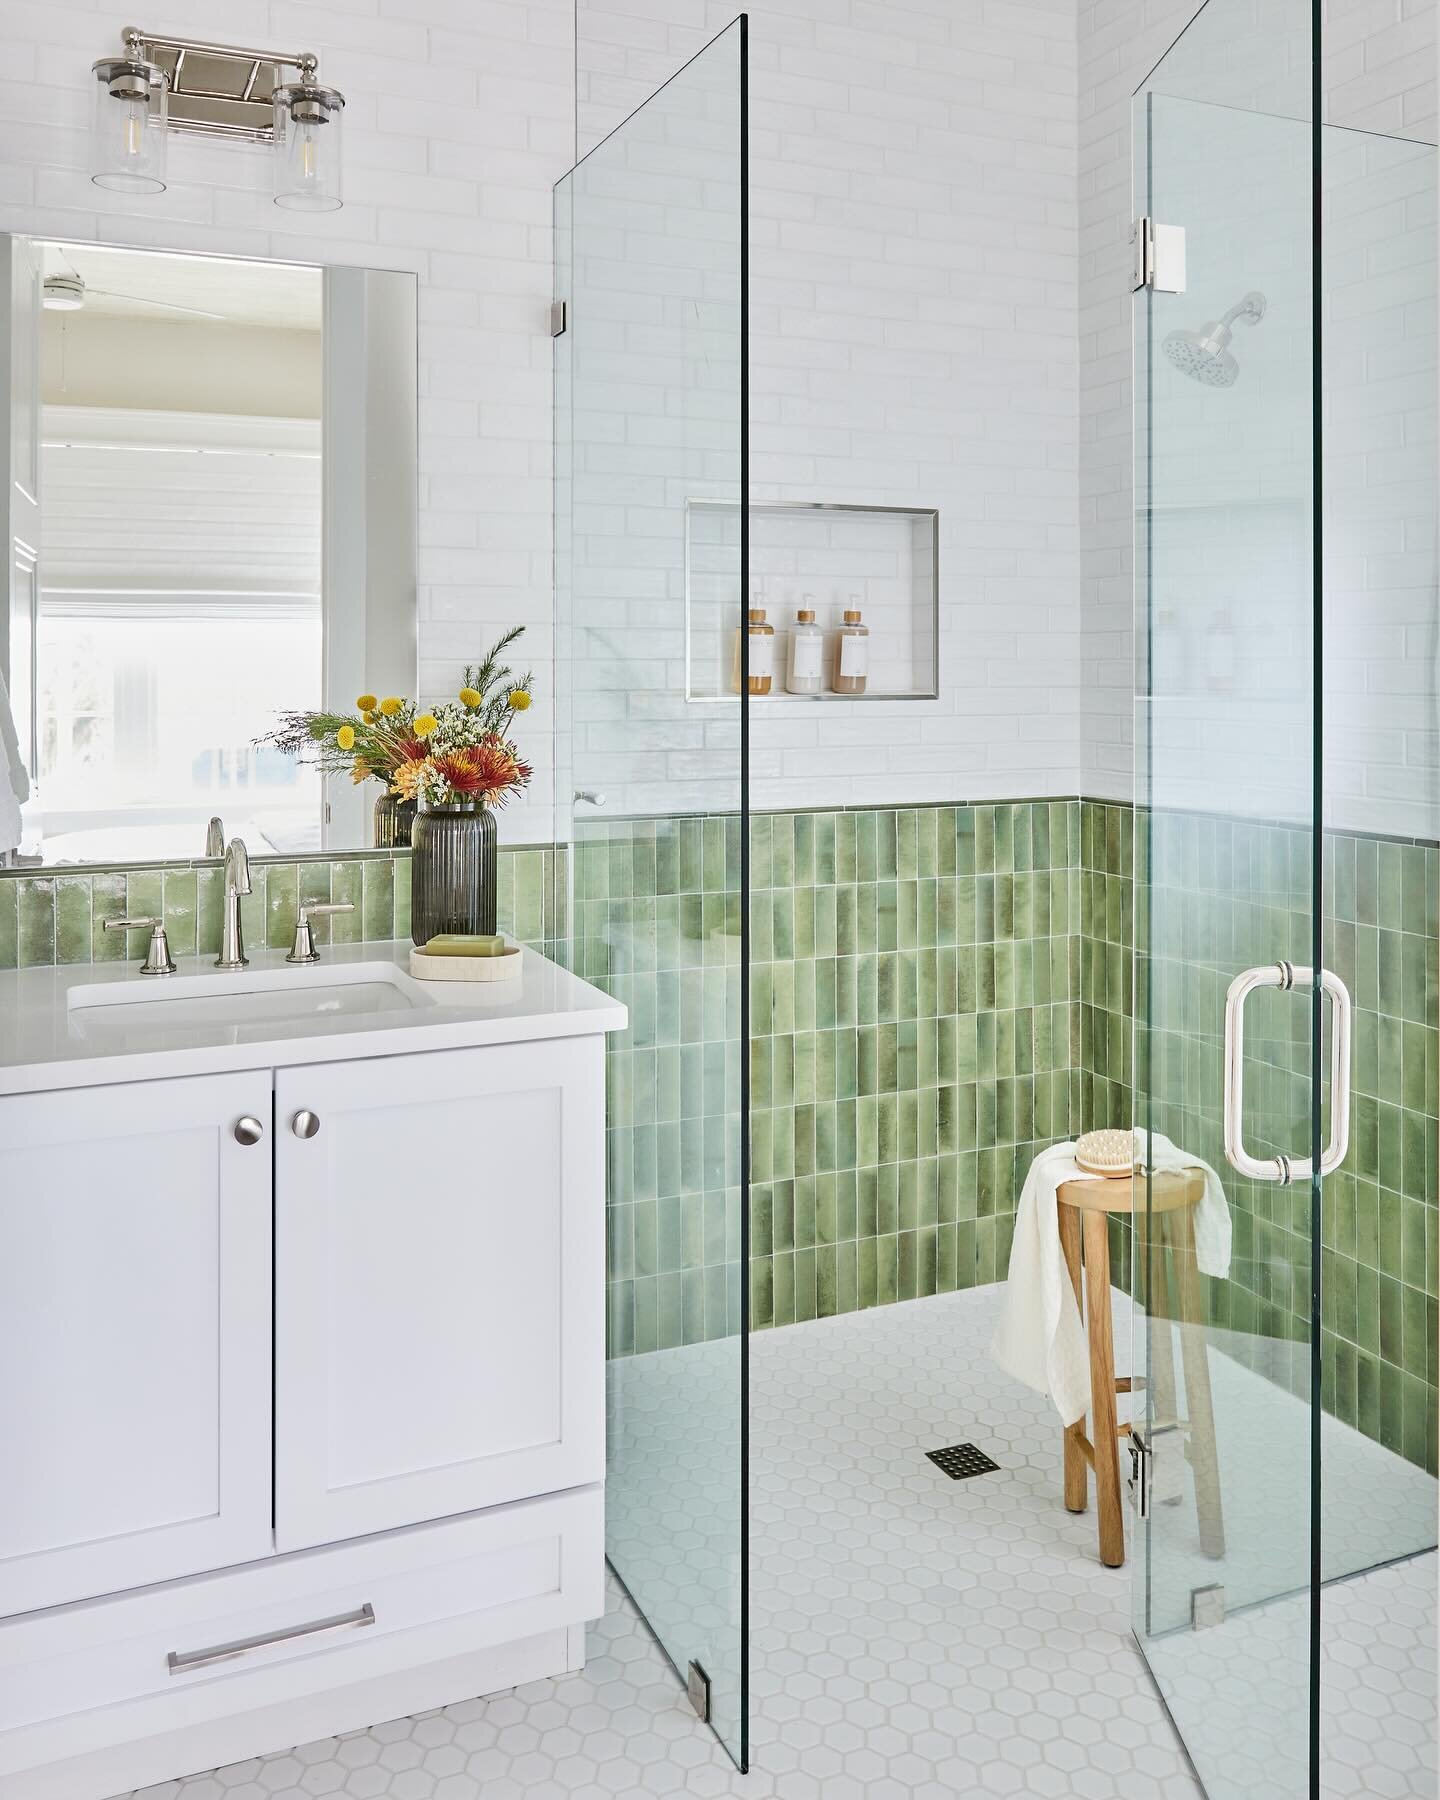 Bringing nature&rsquo;s shades into every part of #casaverdeproject, where even the bathroom boasts tranquility with its green tiles 🌿✨

Interior Design: @emilymossdesigns 

#coastaldesign #coastalmodern #luxuryinteriordesign#highendinteriordesign #